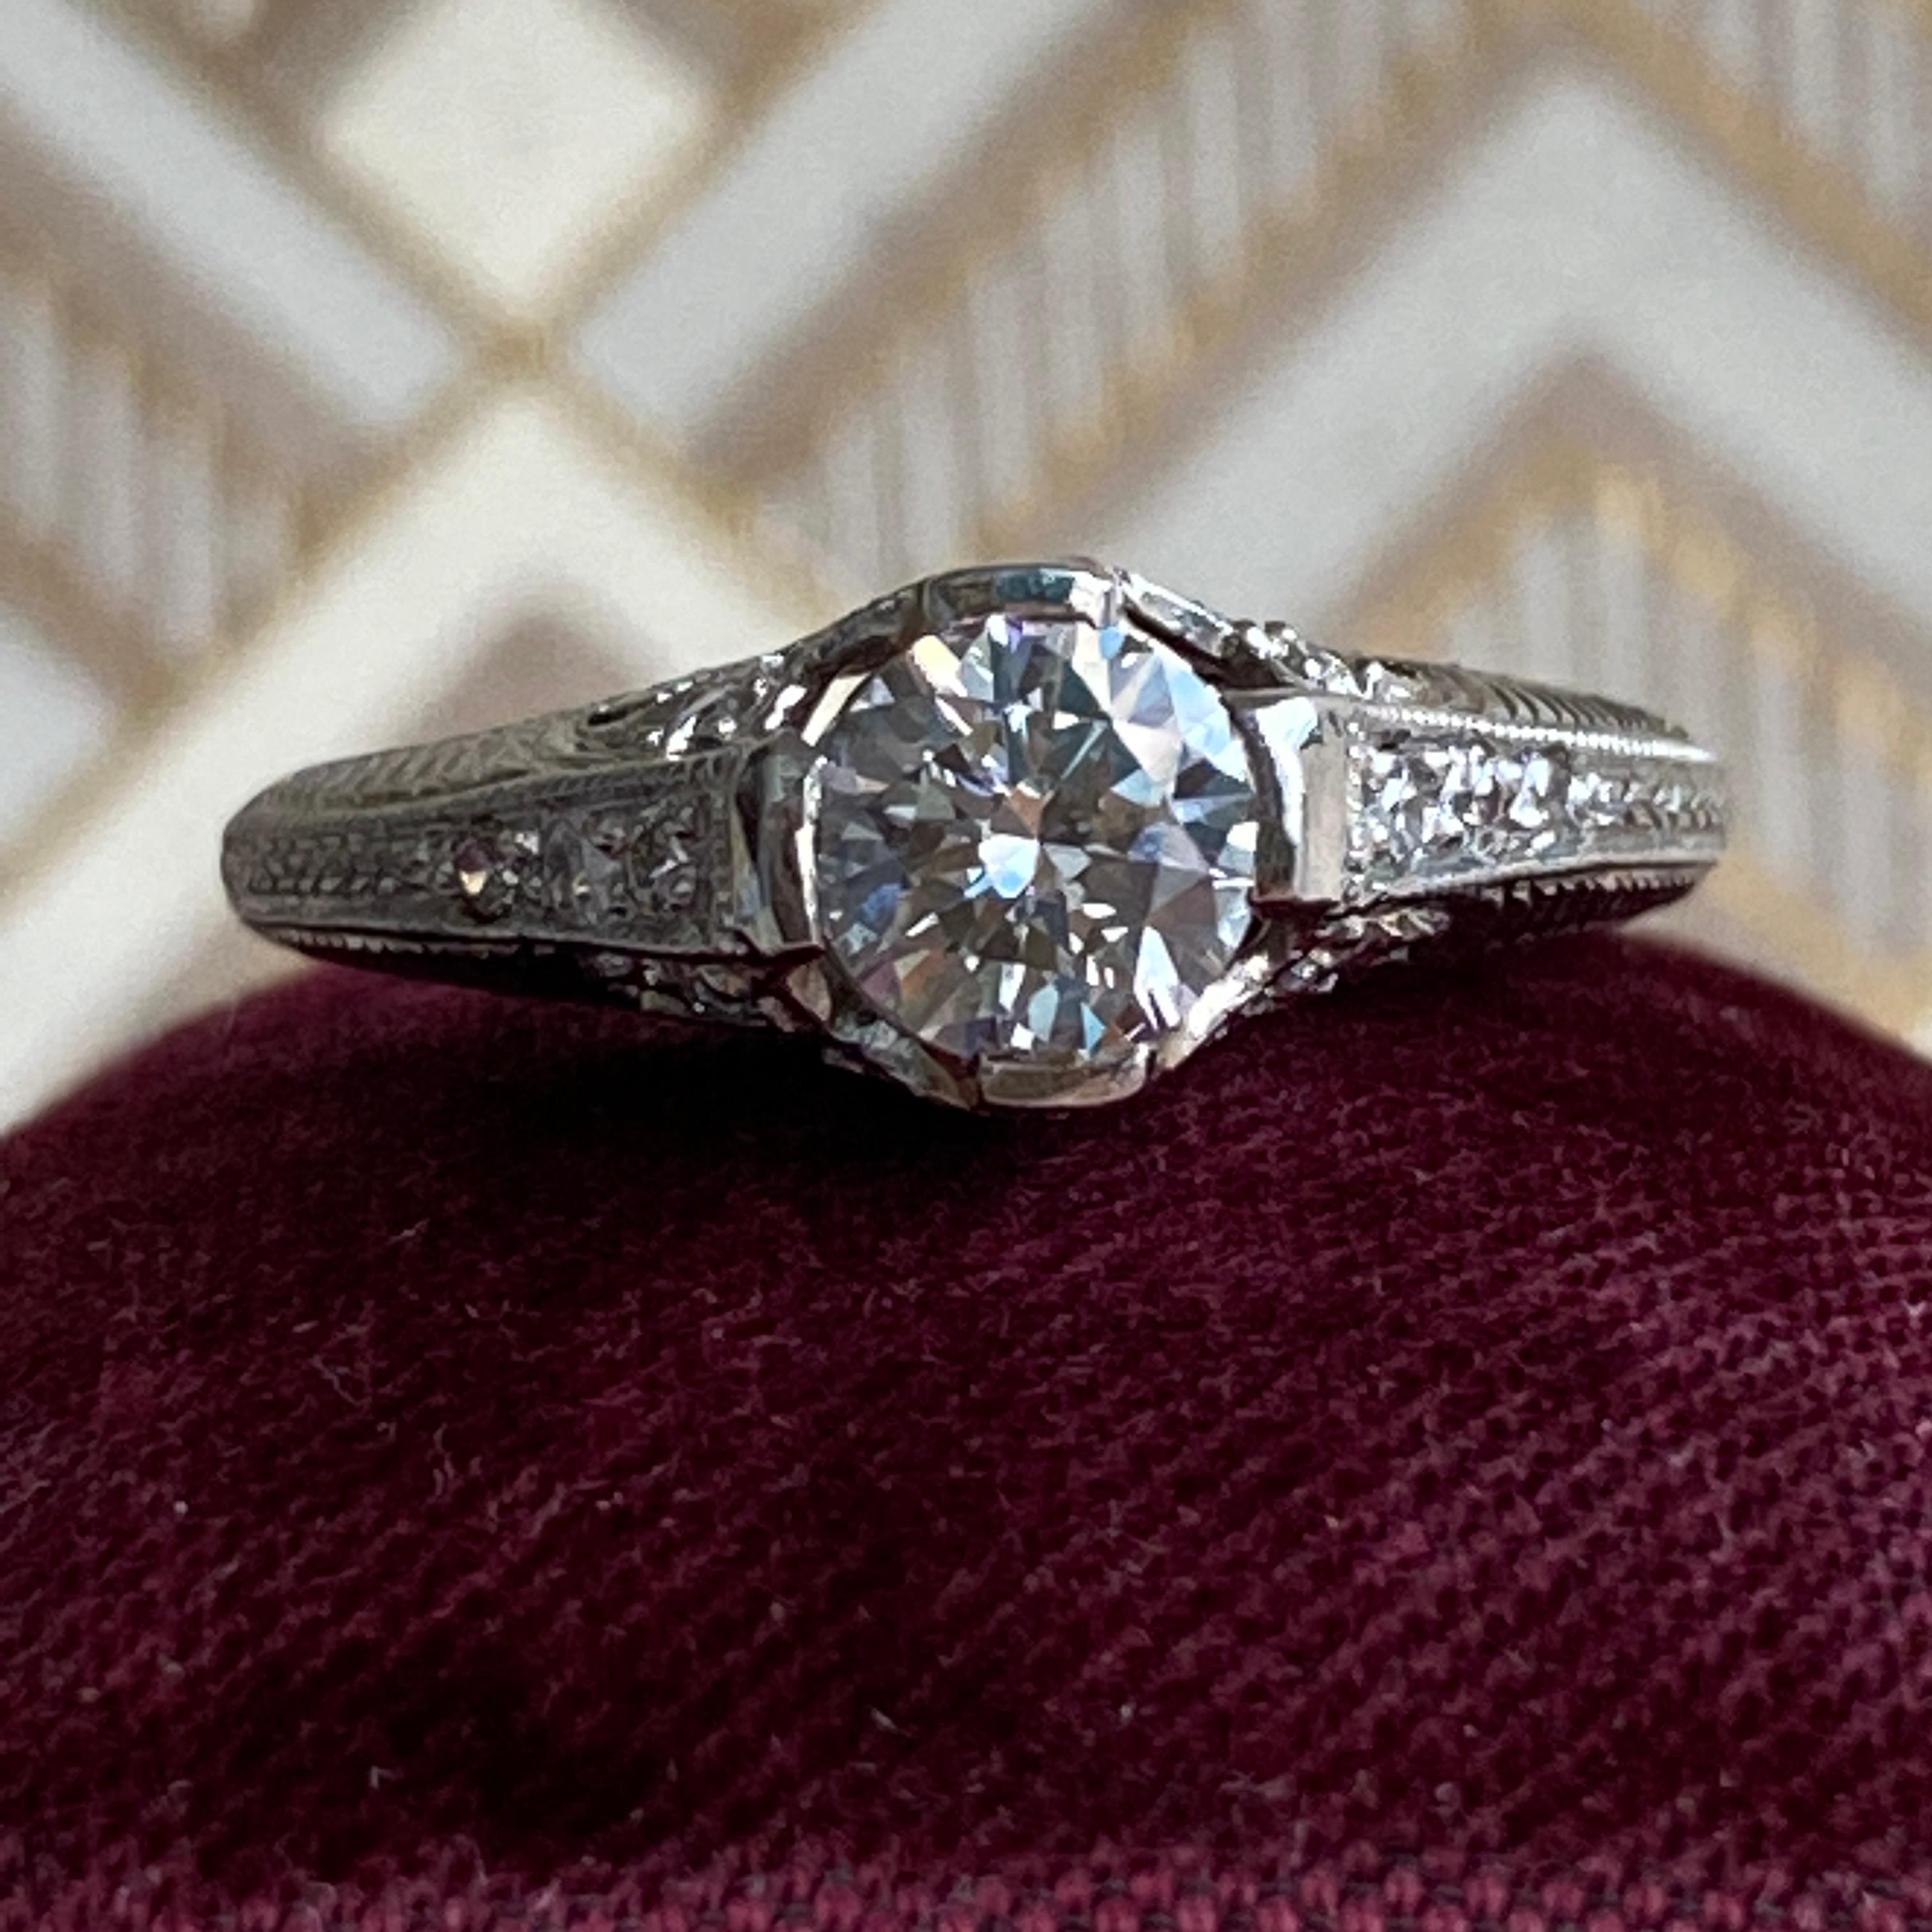 Details:
Lovely Edwardian platinum and diamond engagement ring (dates 1900-1910). Delicate design with a delicate hand cut filigree with engraved details surrounding the elegant detailed mounting. The engraving goes half around the band. The height